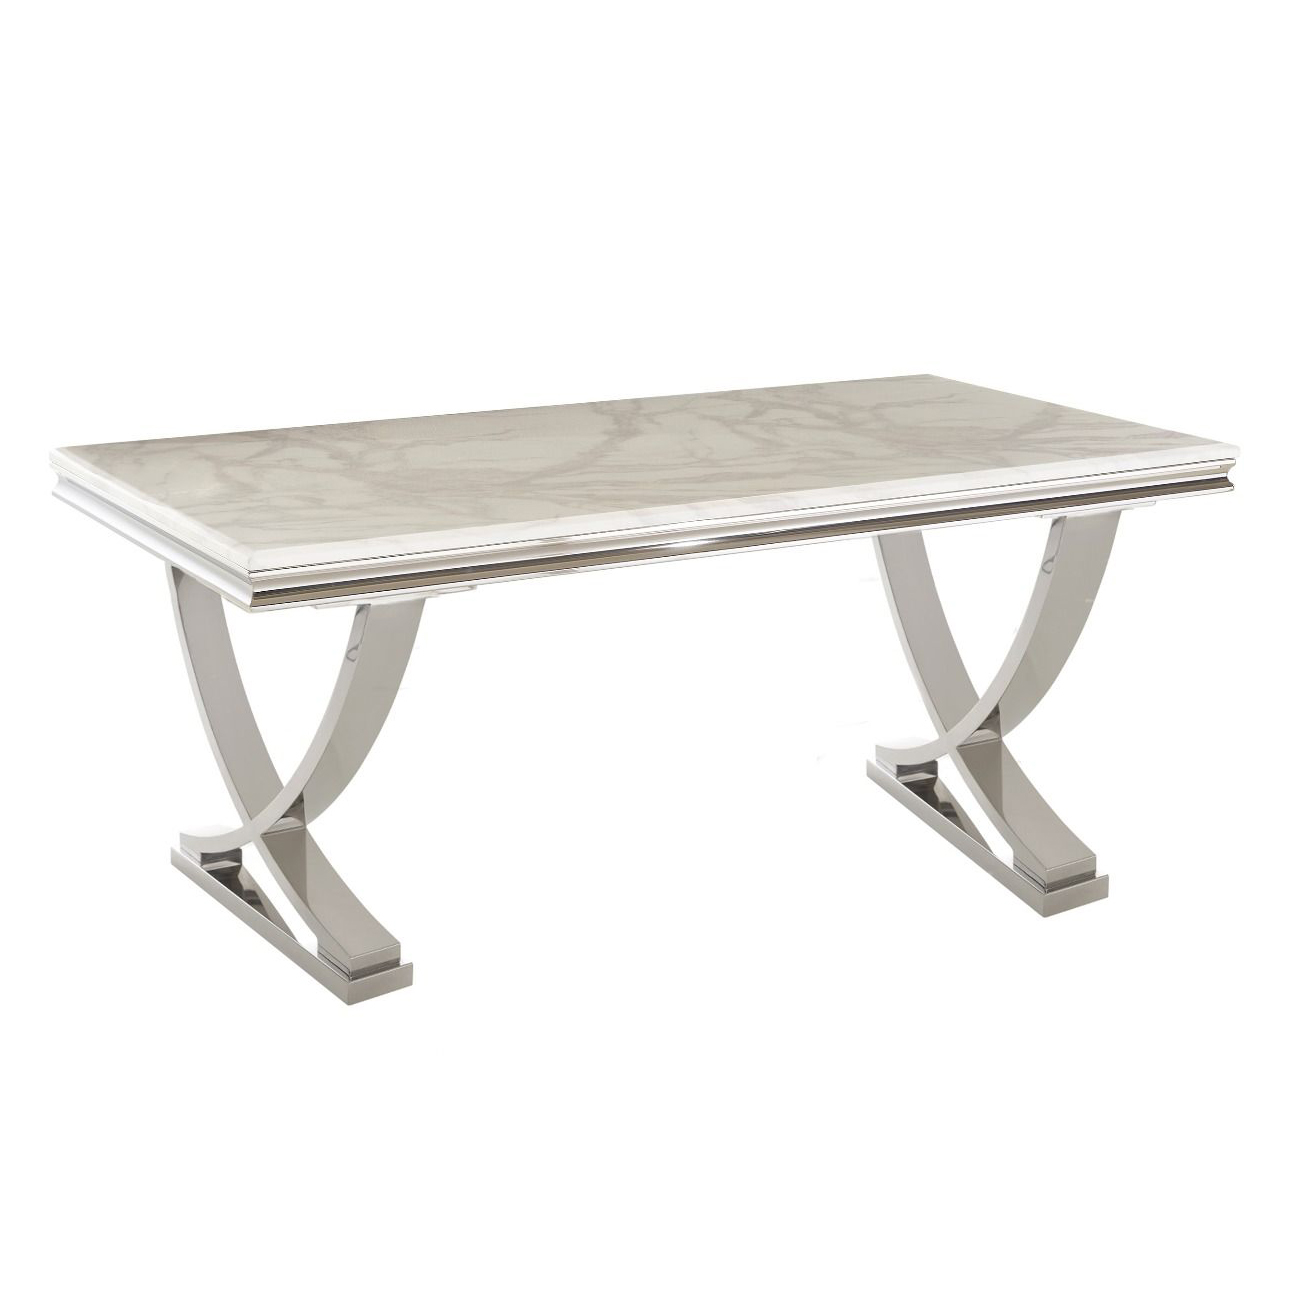 Sienna White Marble 1.8m Dining Table